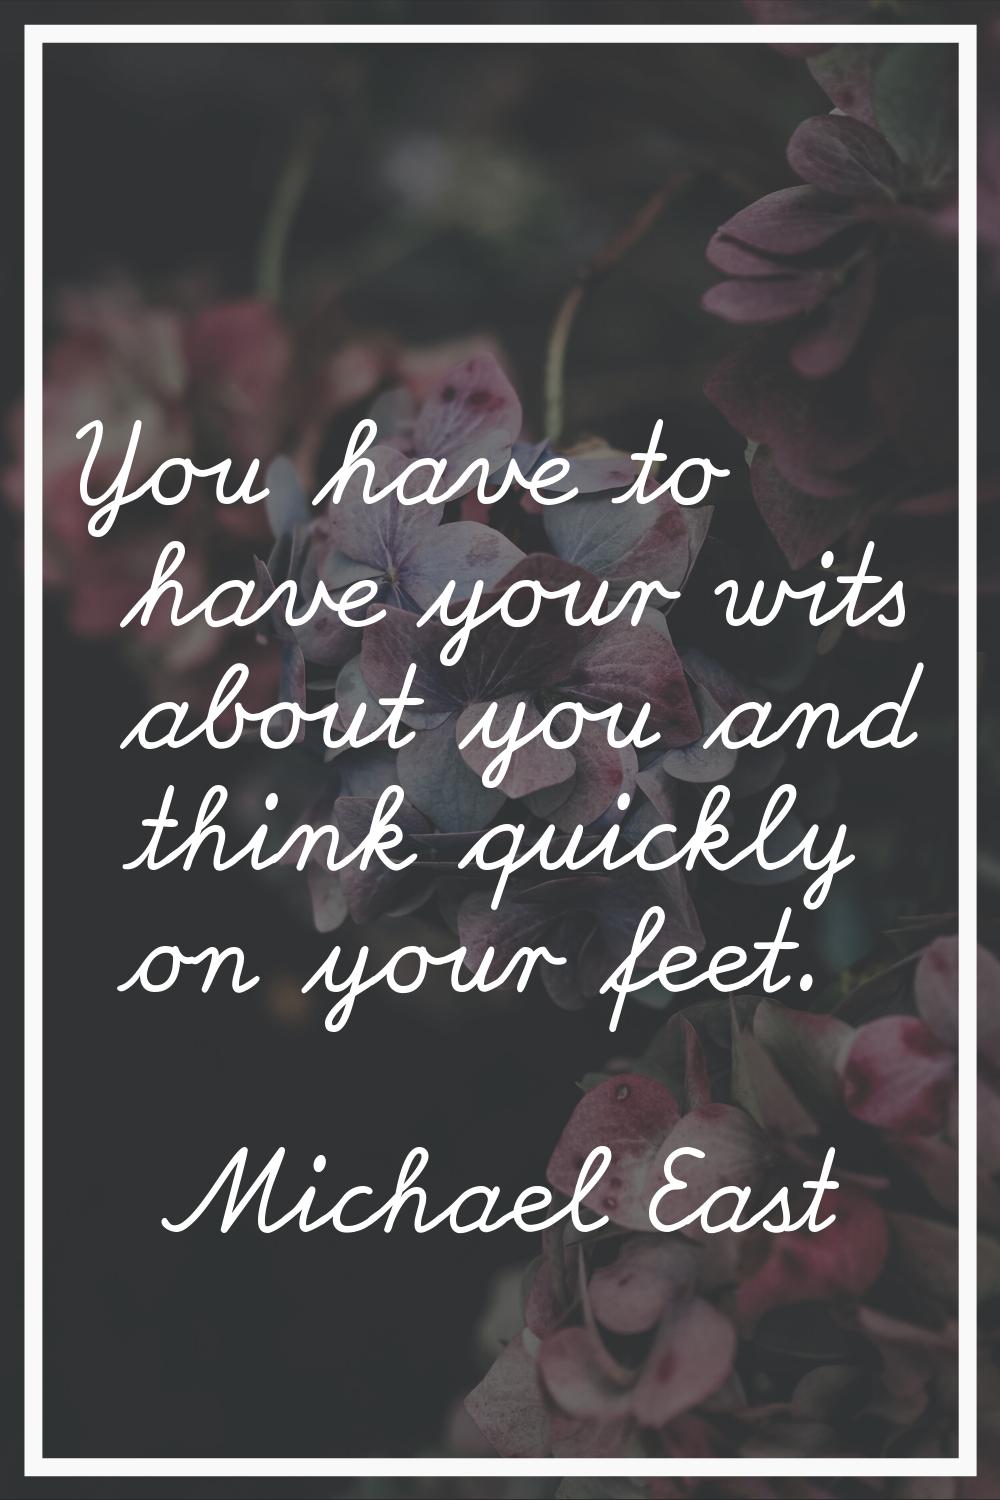 You have to have your wits about you and think quickly on your feet.